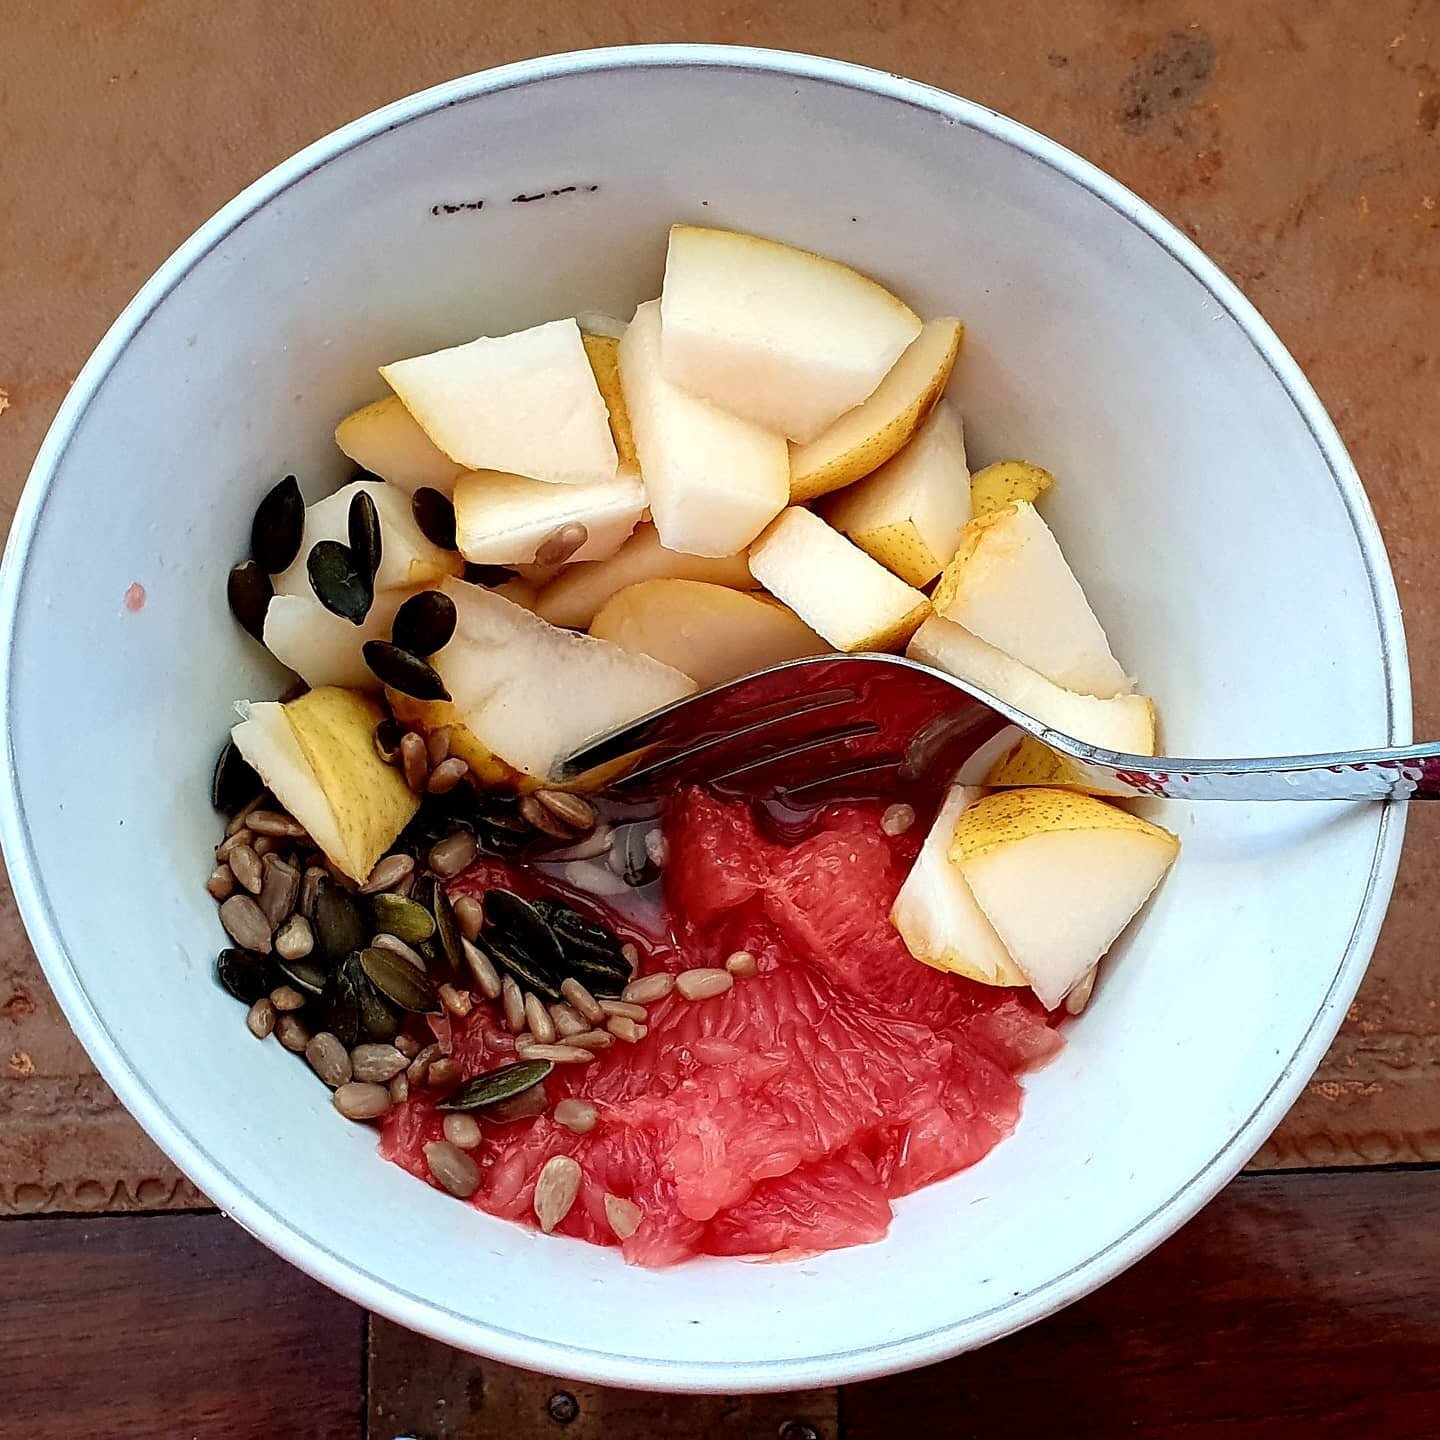 Breakfast, it needn't be complicated, but it does need to be delicious!
🍐 Pear a whole one chopped 
🍊 Grapefruit, skinned and trimmed 
🎃 Pumpkin seeds 
🌻 Sunflower seeds 
#grainfreebreakfast #naturalsugars #immuneboostingfoods #vitaminc #bowelhea